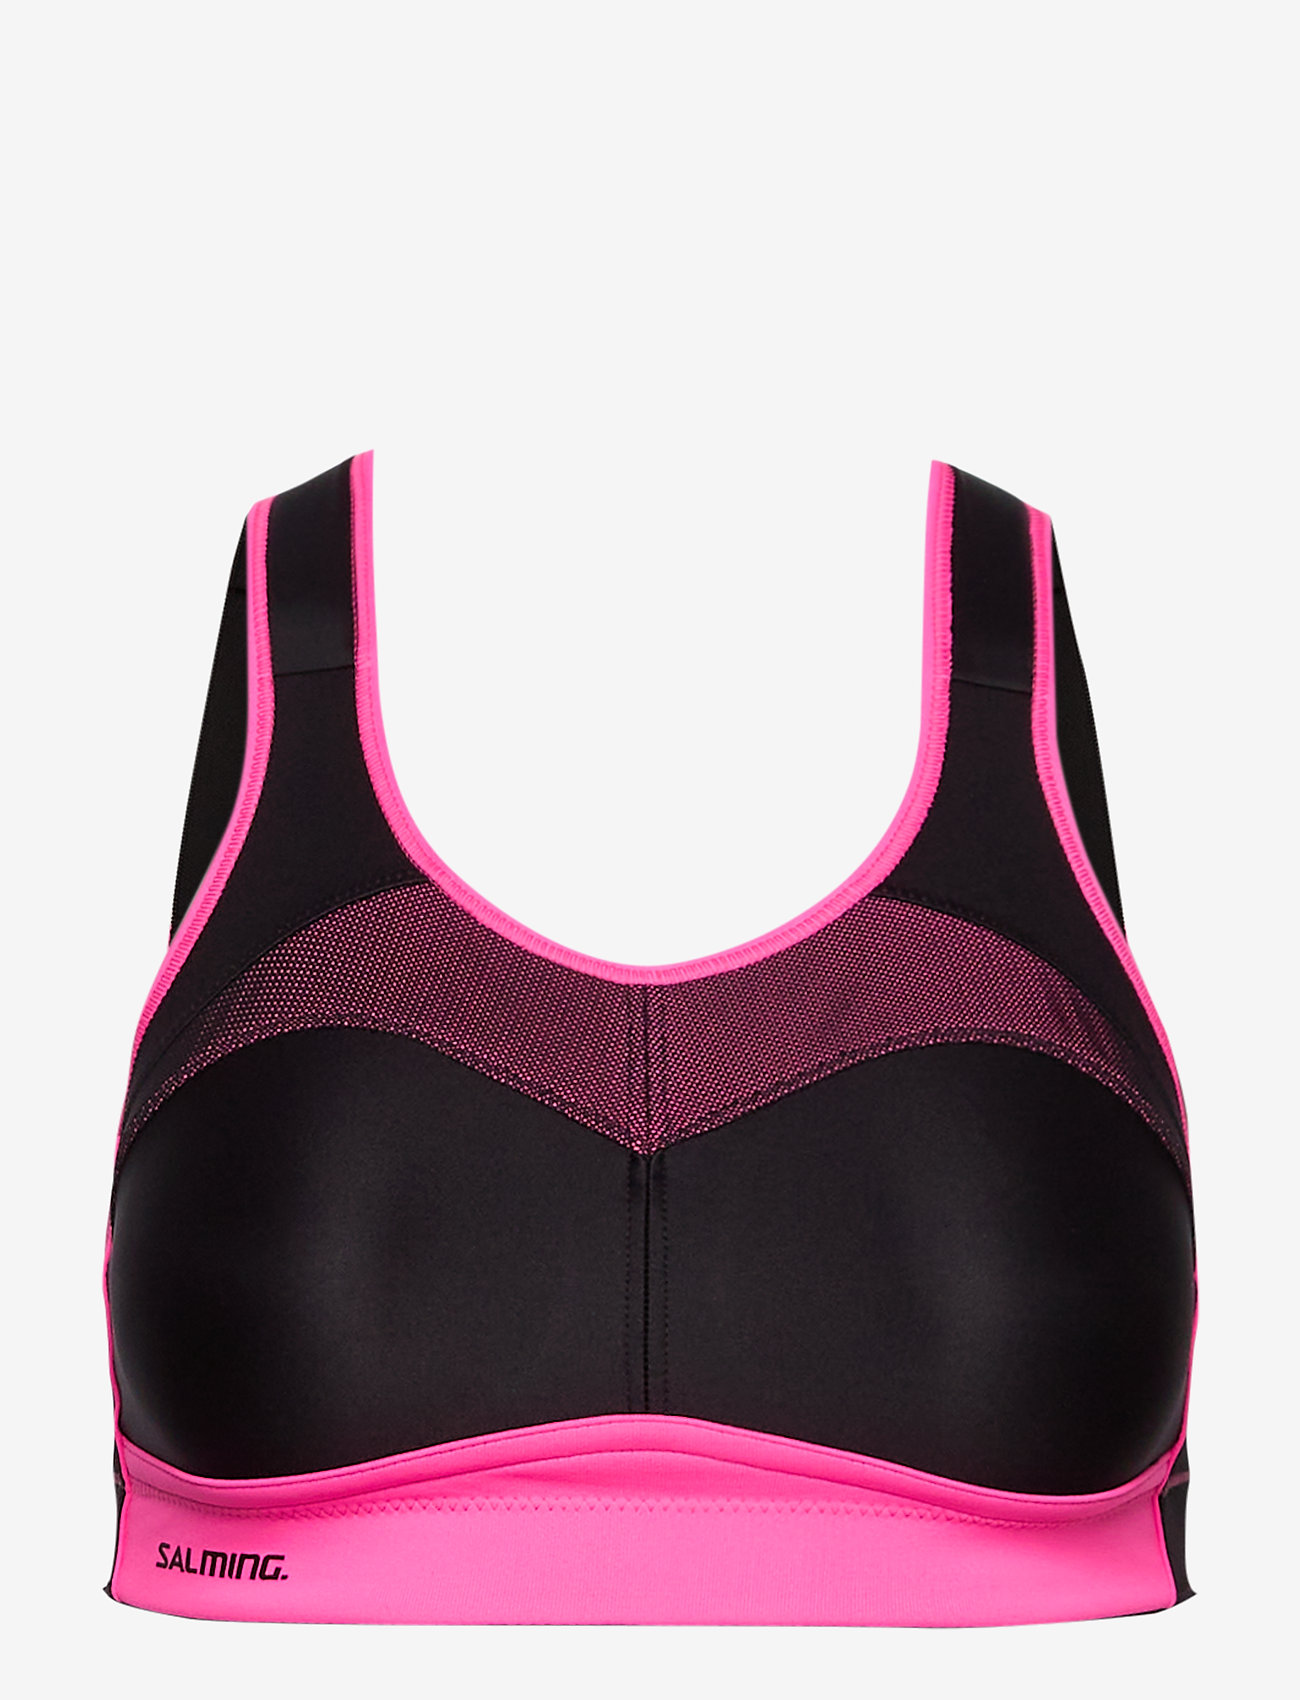 Salming - Capacity, Sports top - sport bras: high support - pink - 1